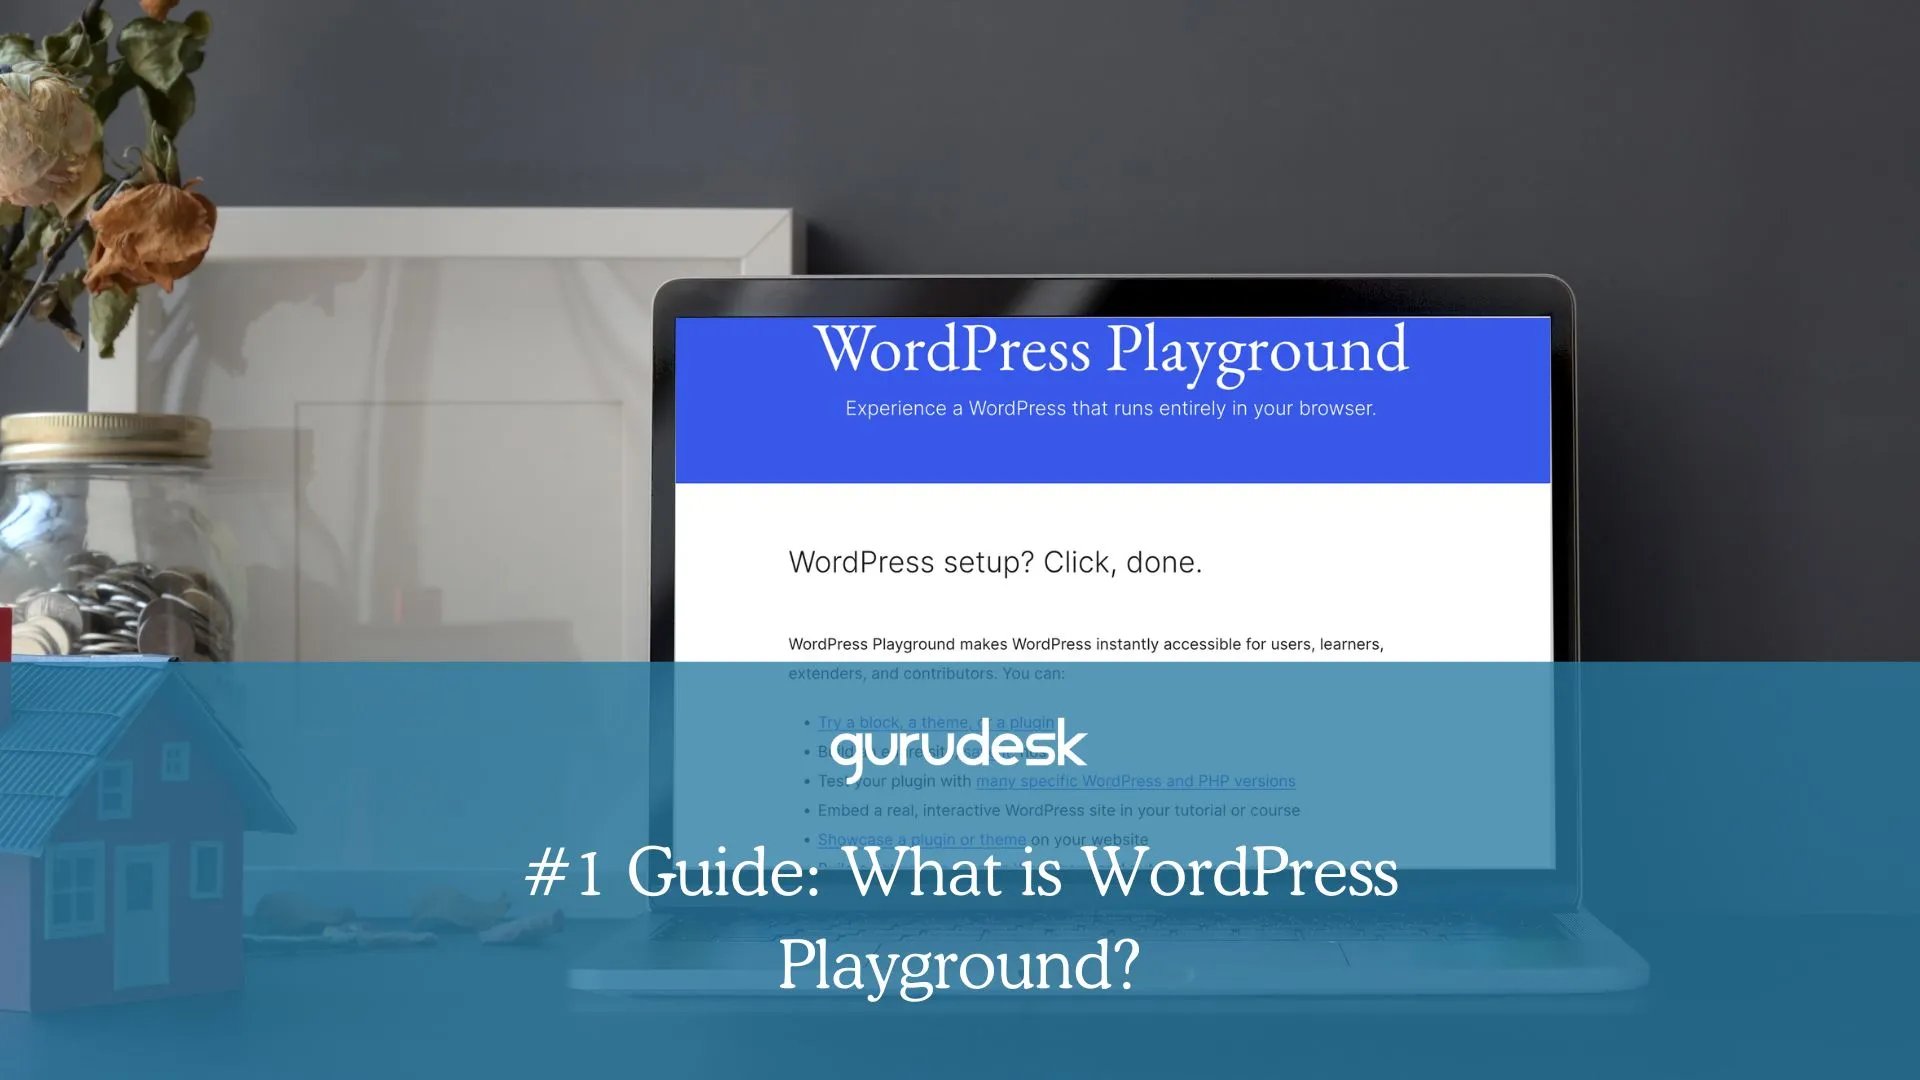 1 Guide- What is WordPress Playgorund